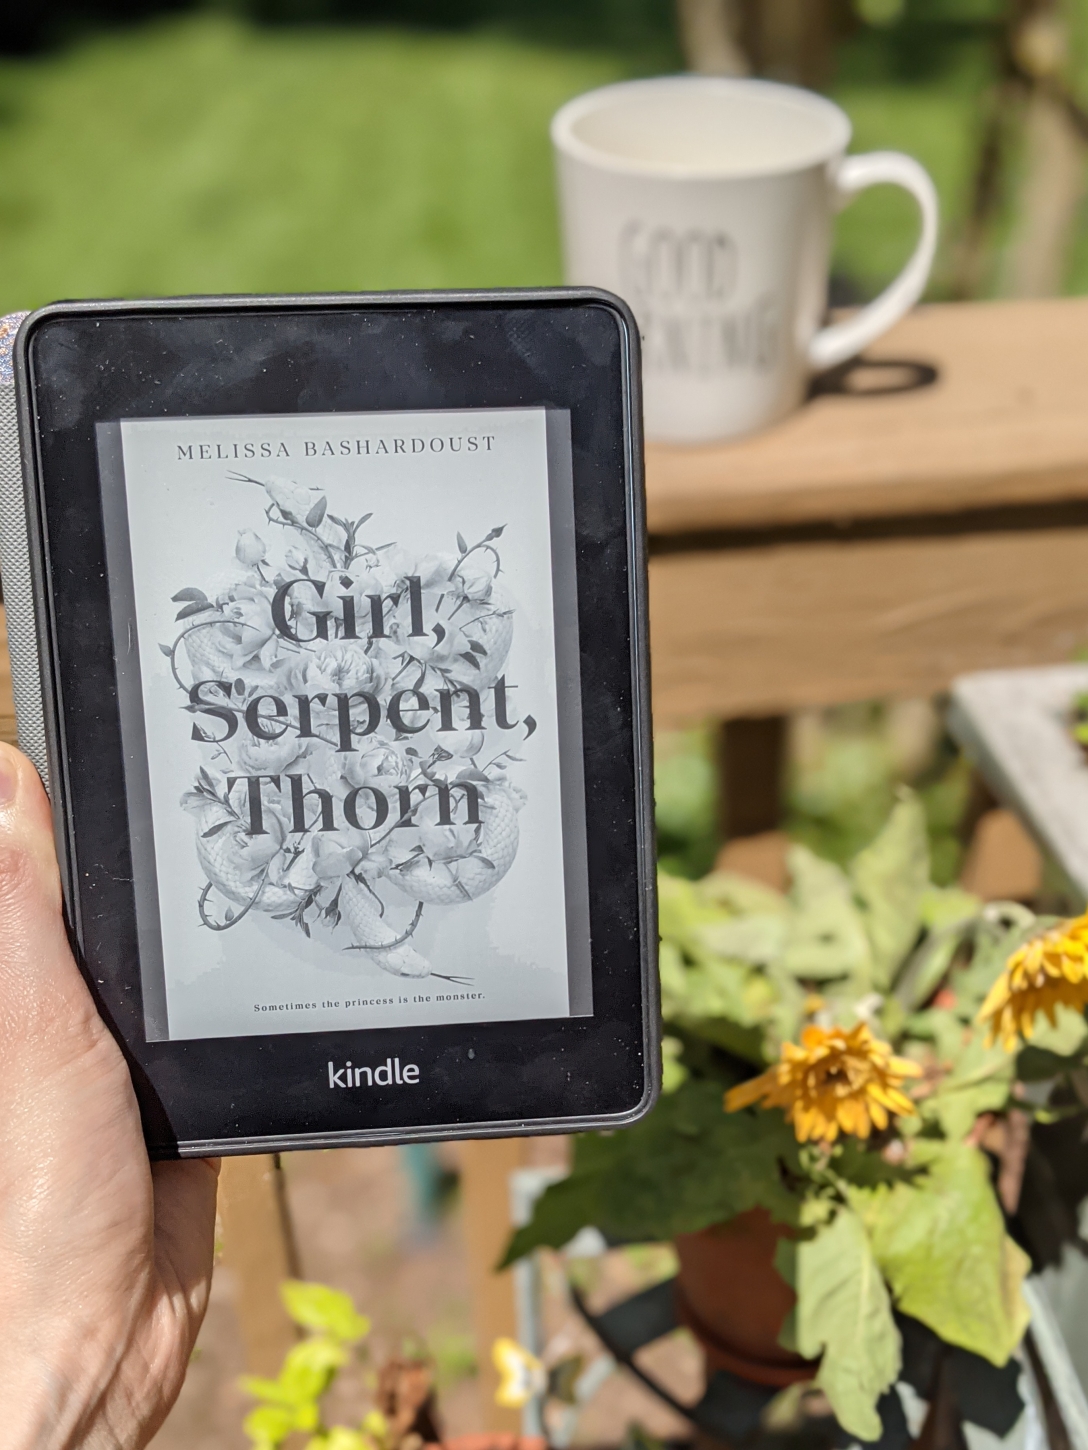 A Kindle cover of Girl, Serpent, Thorn, is held up in front of a Good Morning mug and a small pot of yellow flowers.